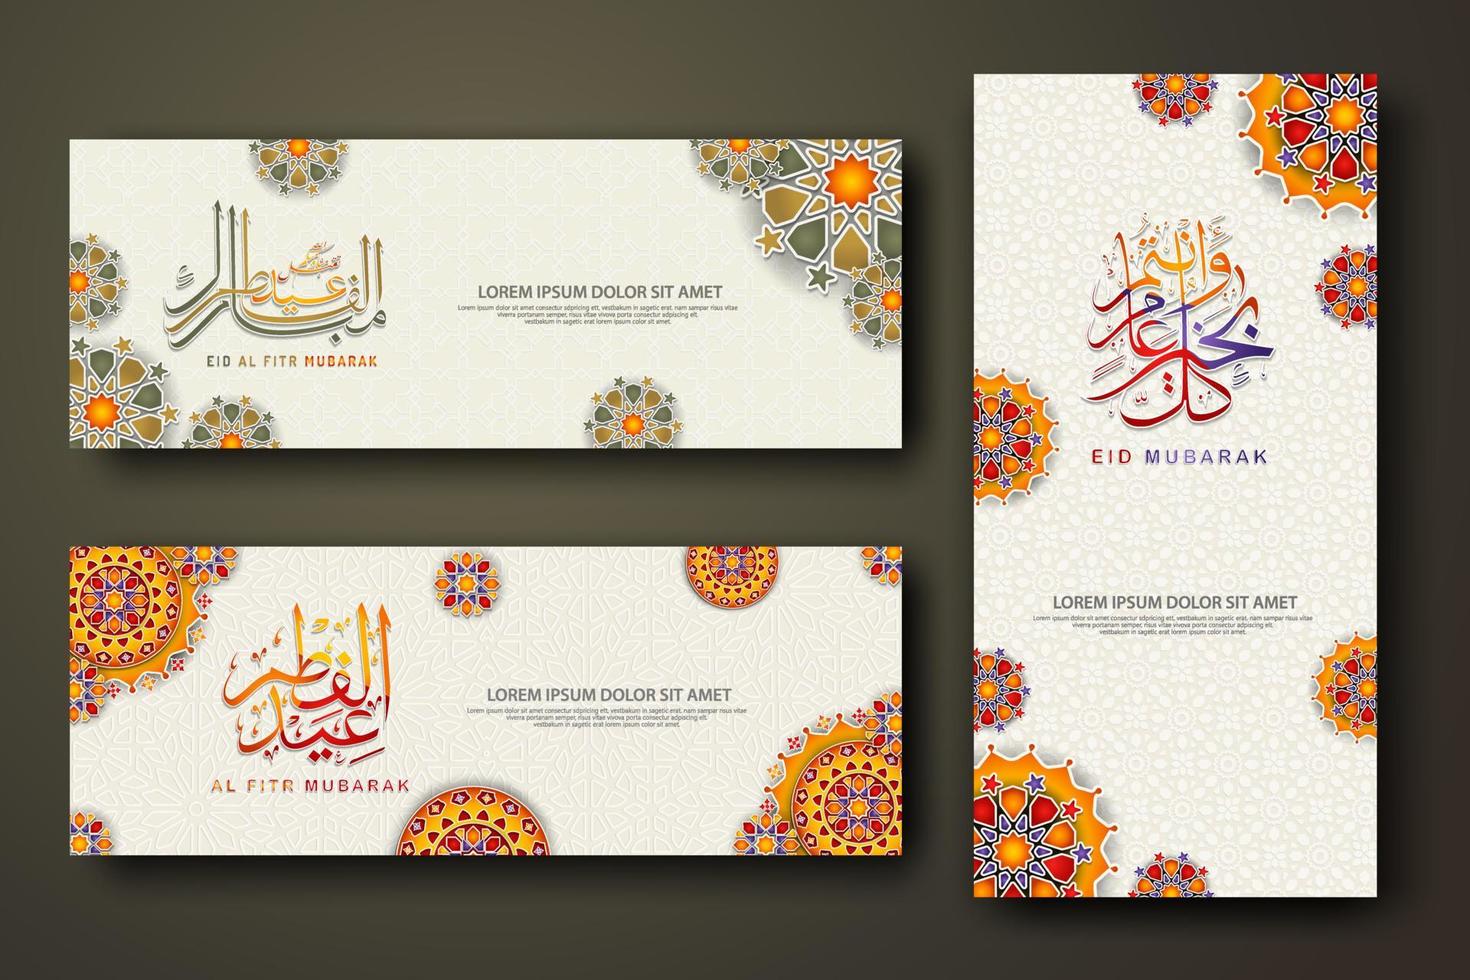 Eid al fitr concept banner with arabic calligraphy and 3d paper flowers on Islamic geometric pattern background. Vector illustration.